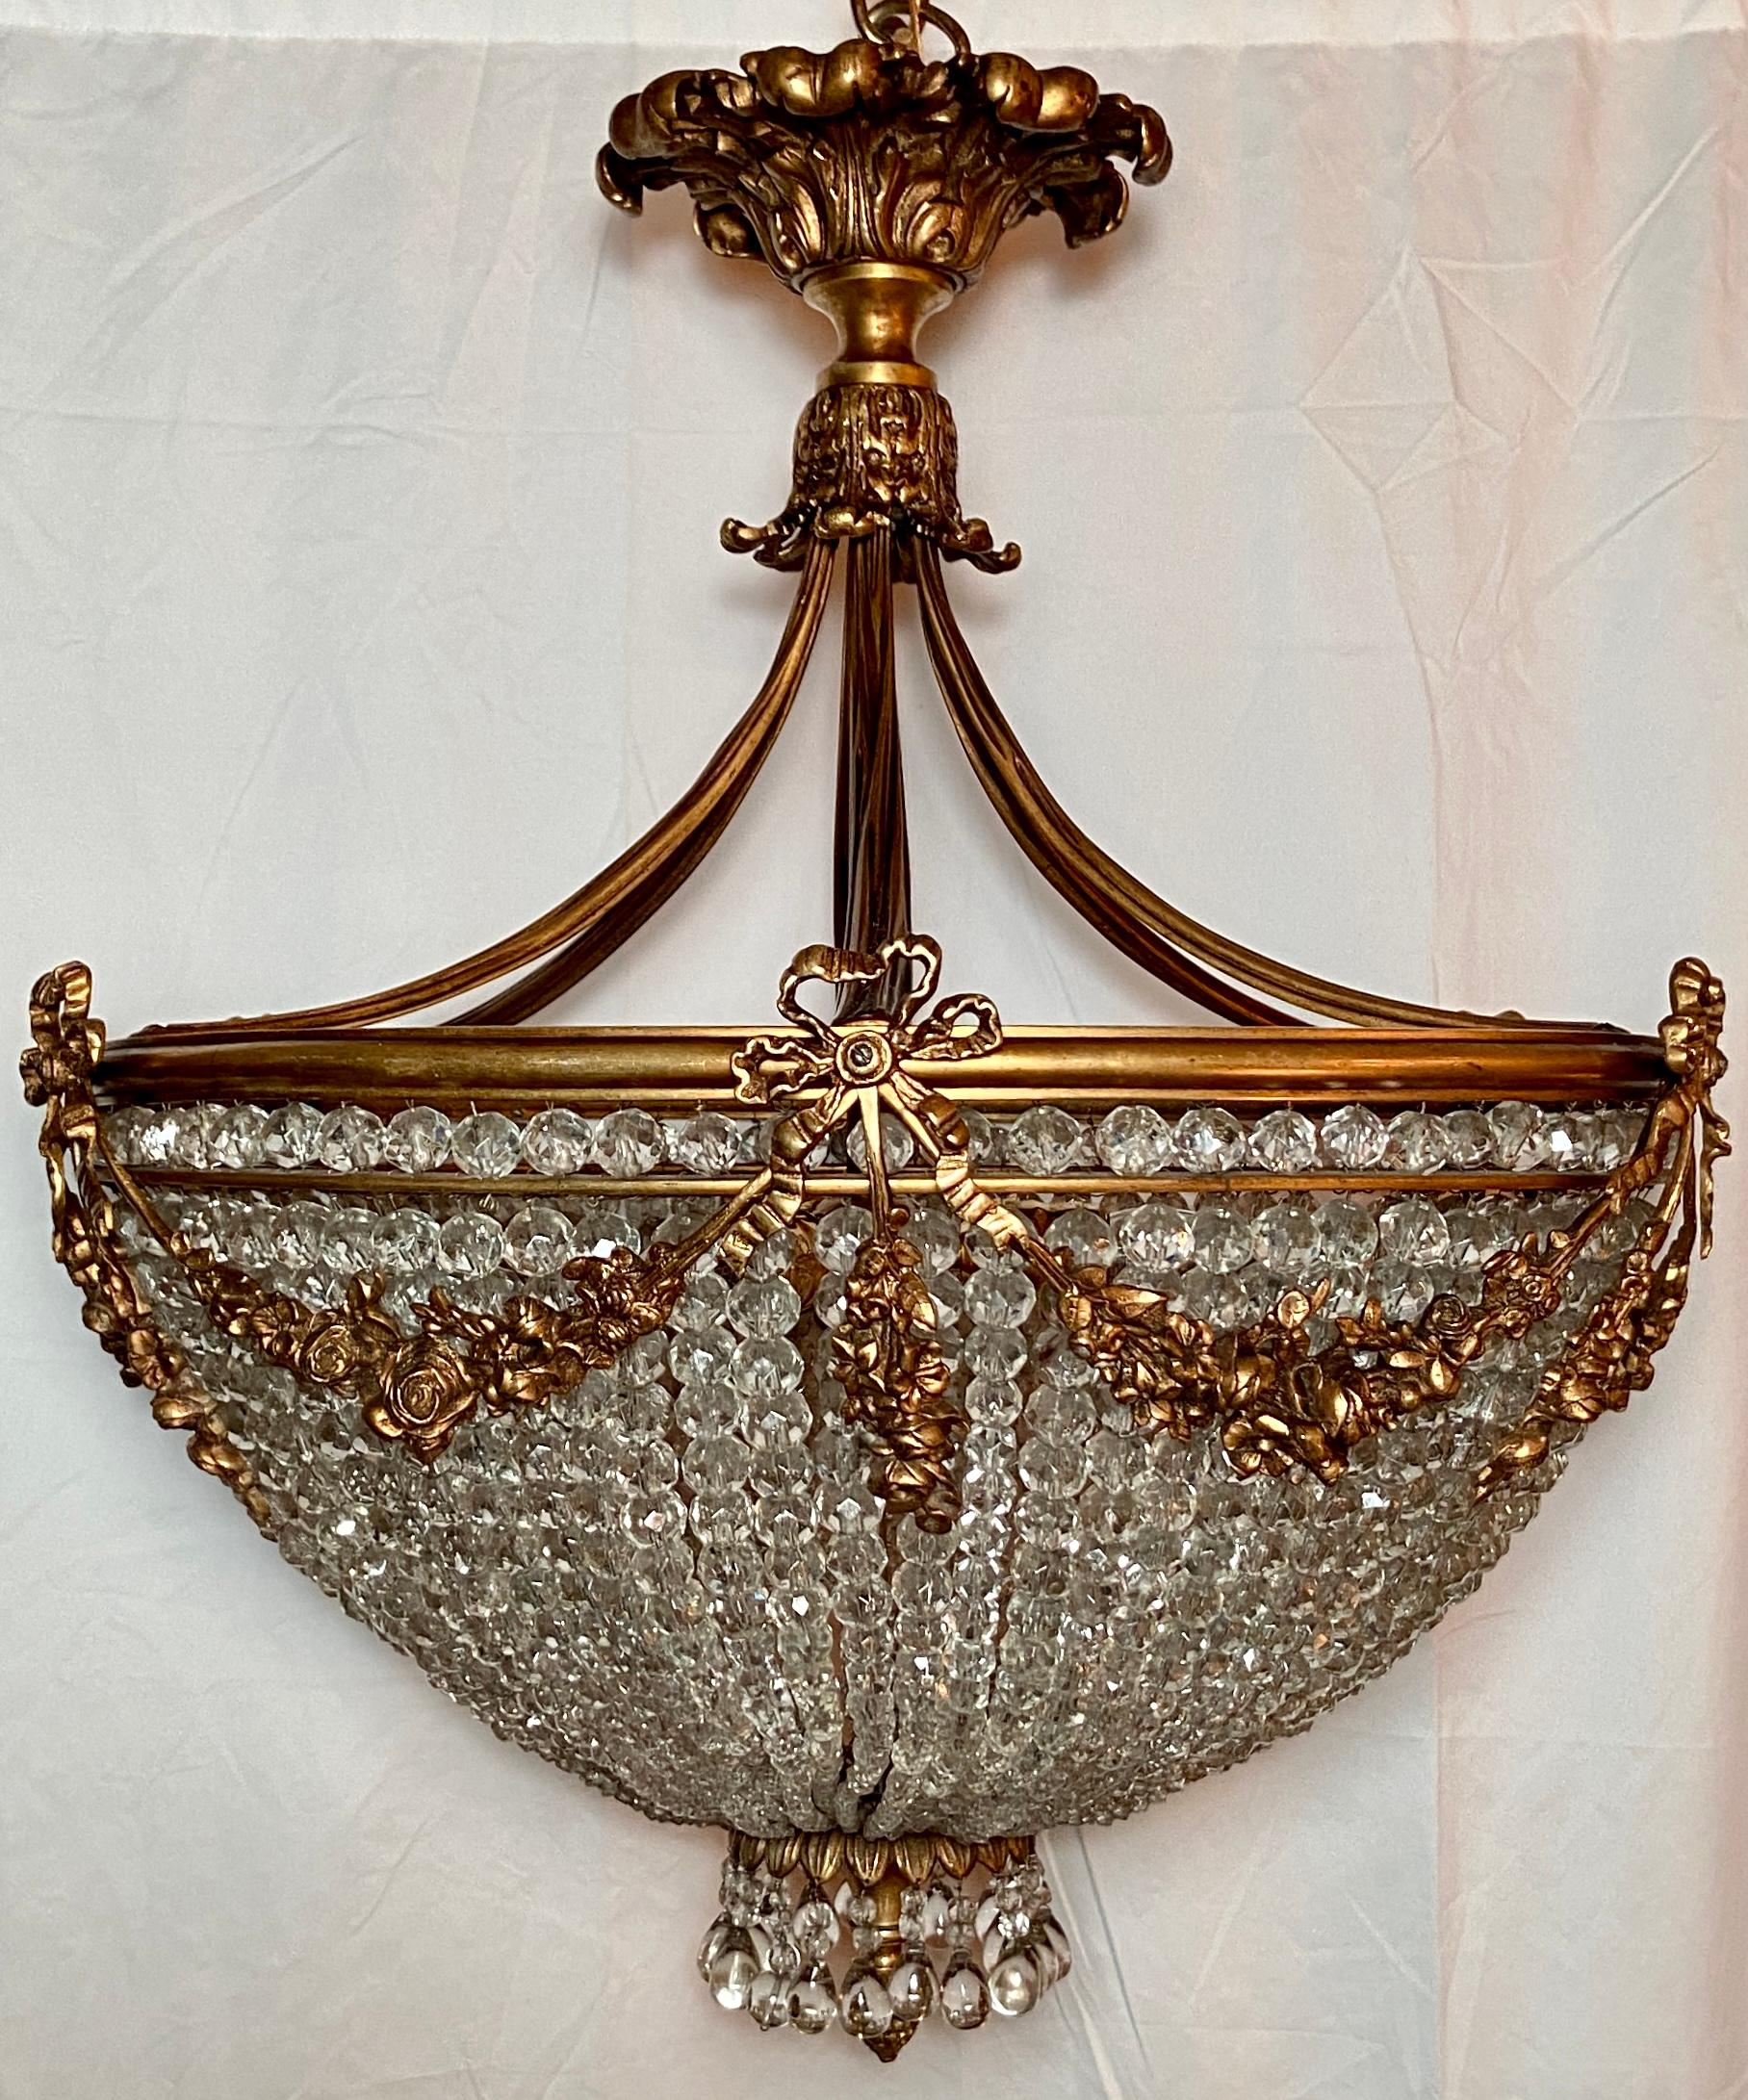 Antique French Louis XVI Gold Bronze and Crystal Chandelier.
The ribbons and garlands gracing this chandelier make it very appealing, in addition to the nice draping of the crystal strands. The fixture could be flush mounted if ceiling heights were